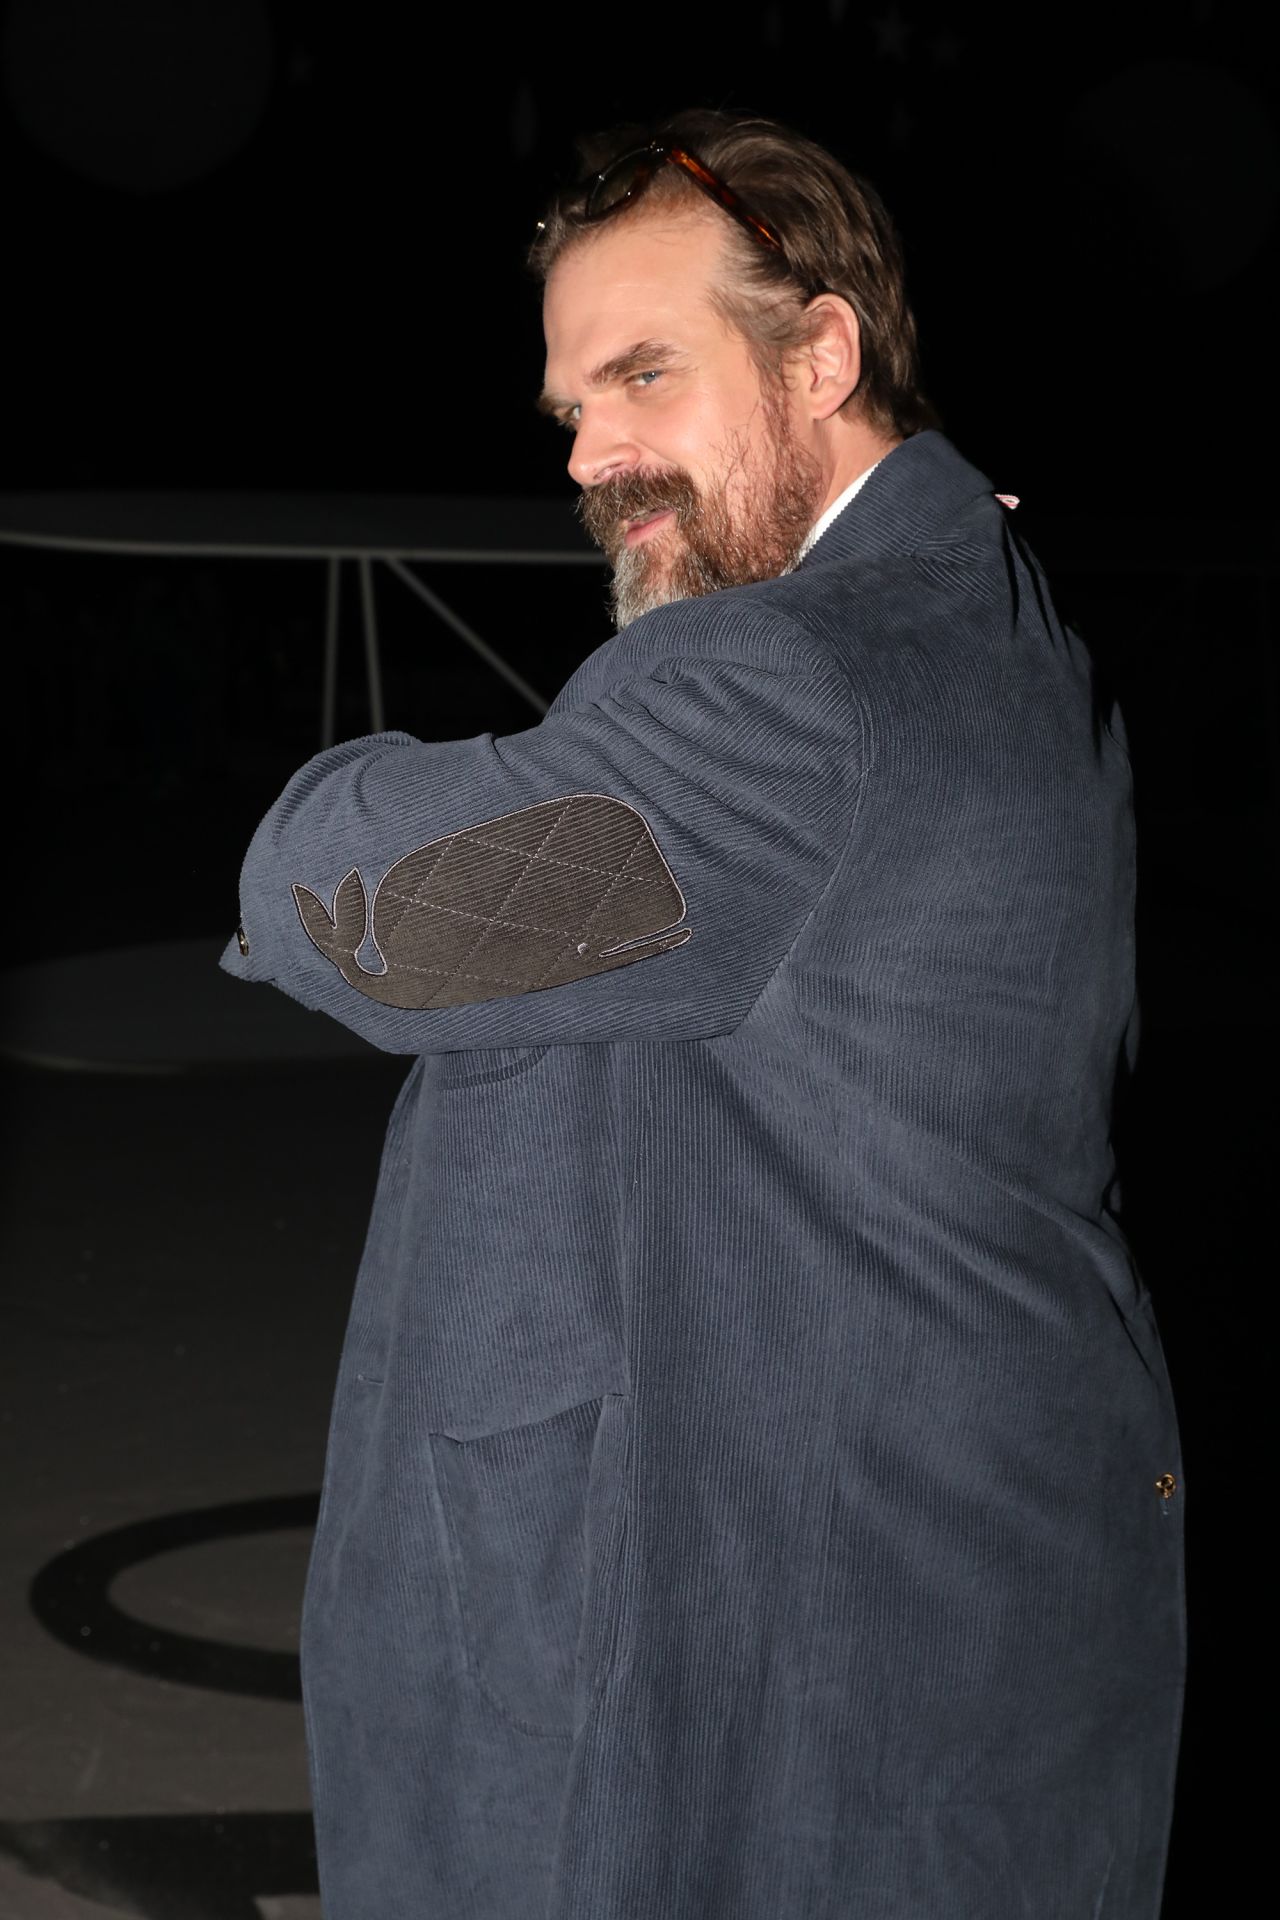 David Harbour was spotted at the Thom Browne show.